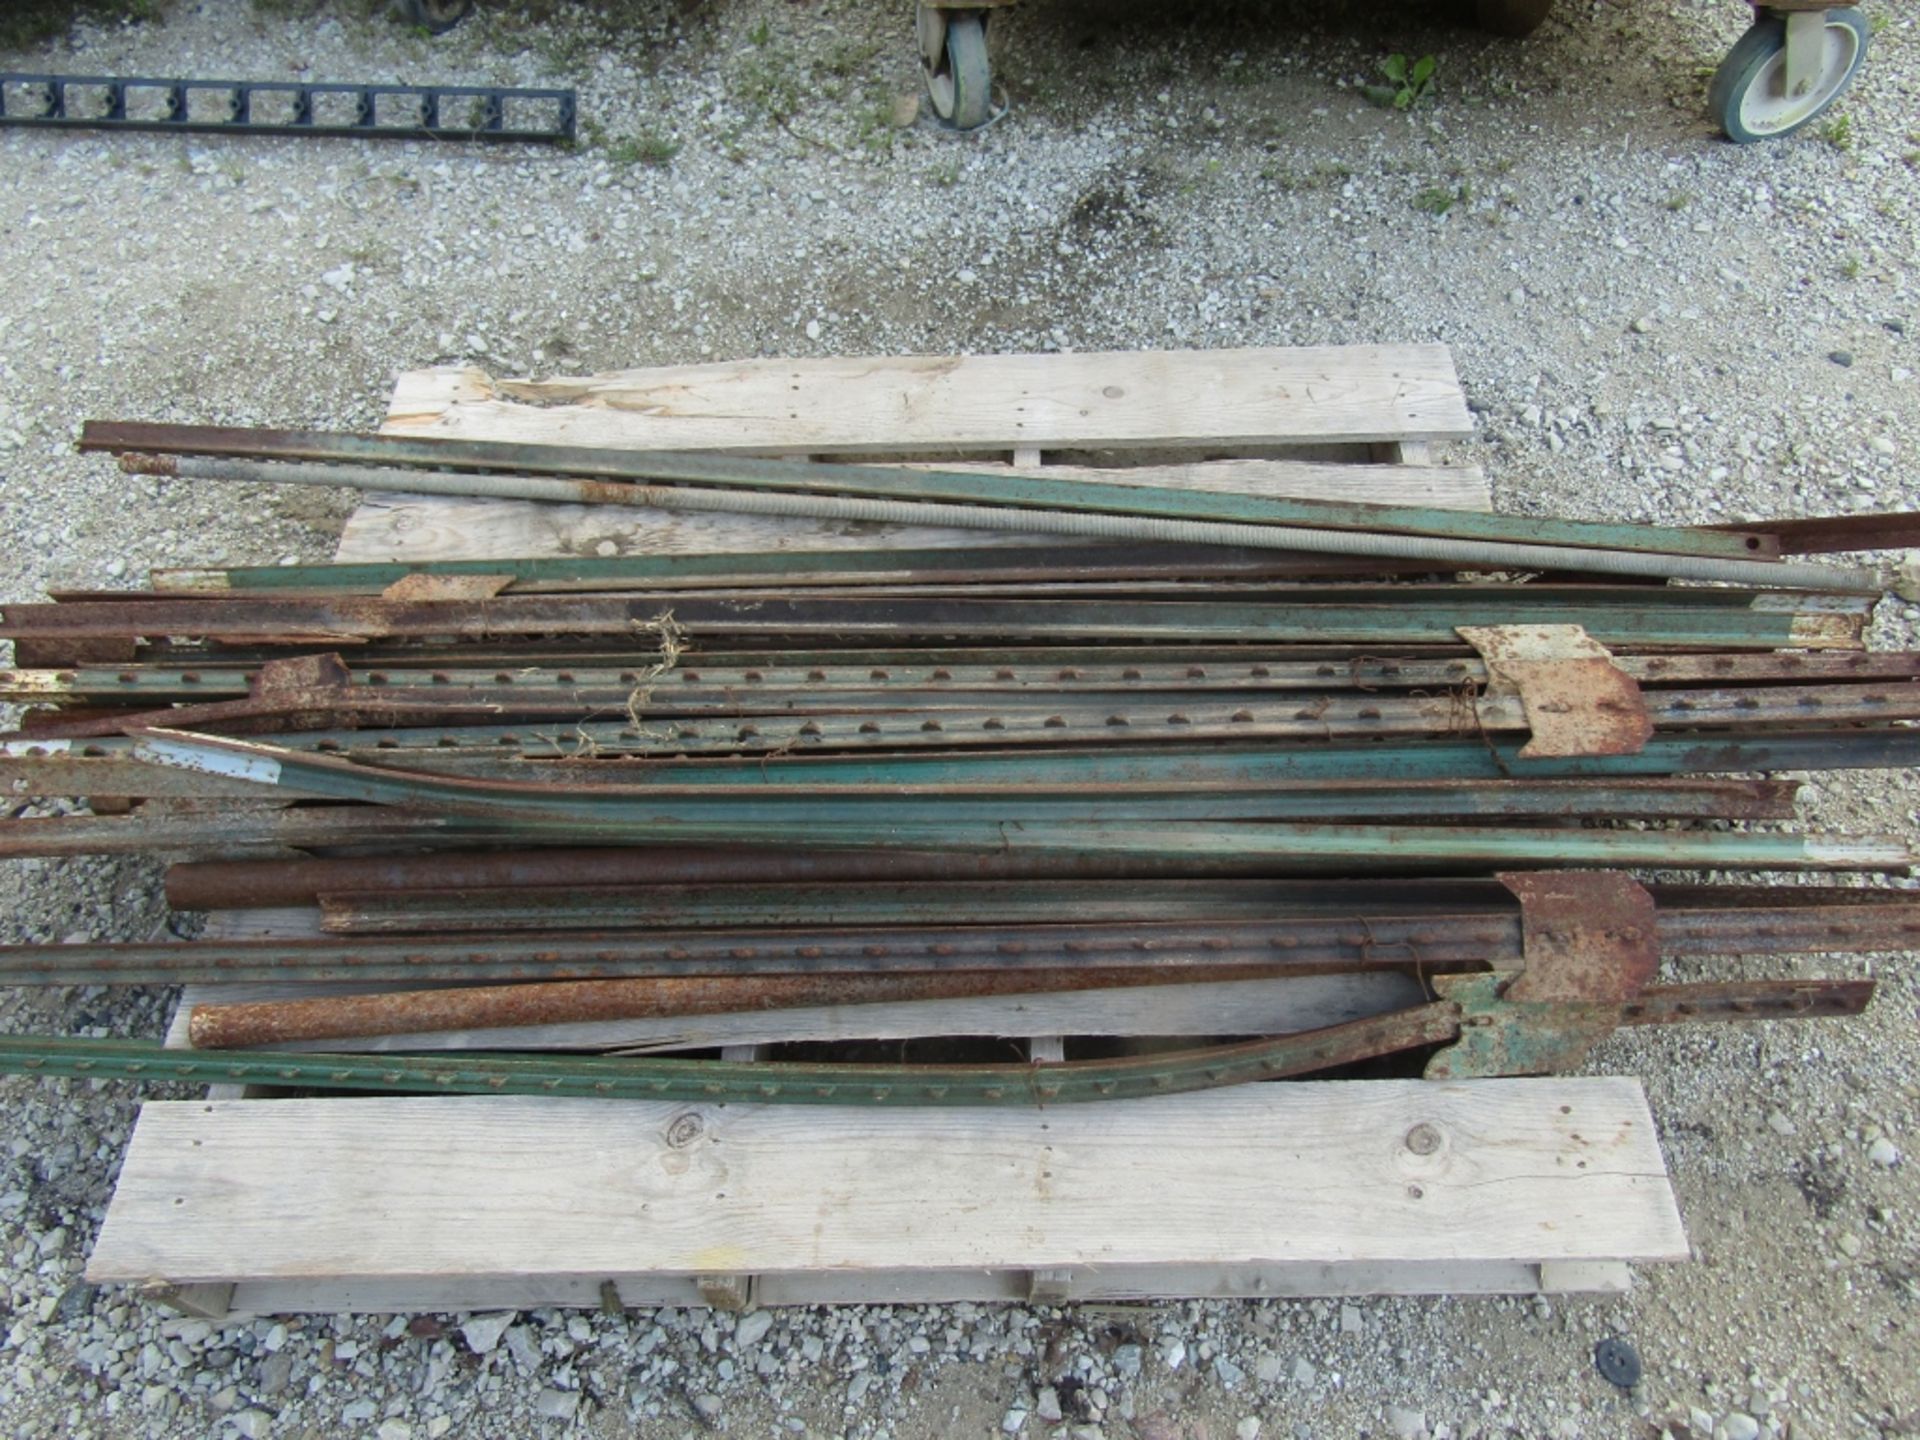 (15) Miscellaneous Fence Posts